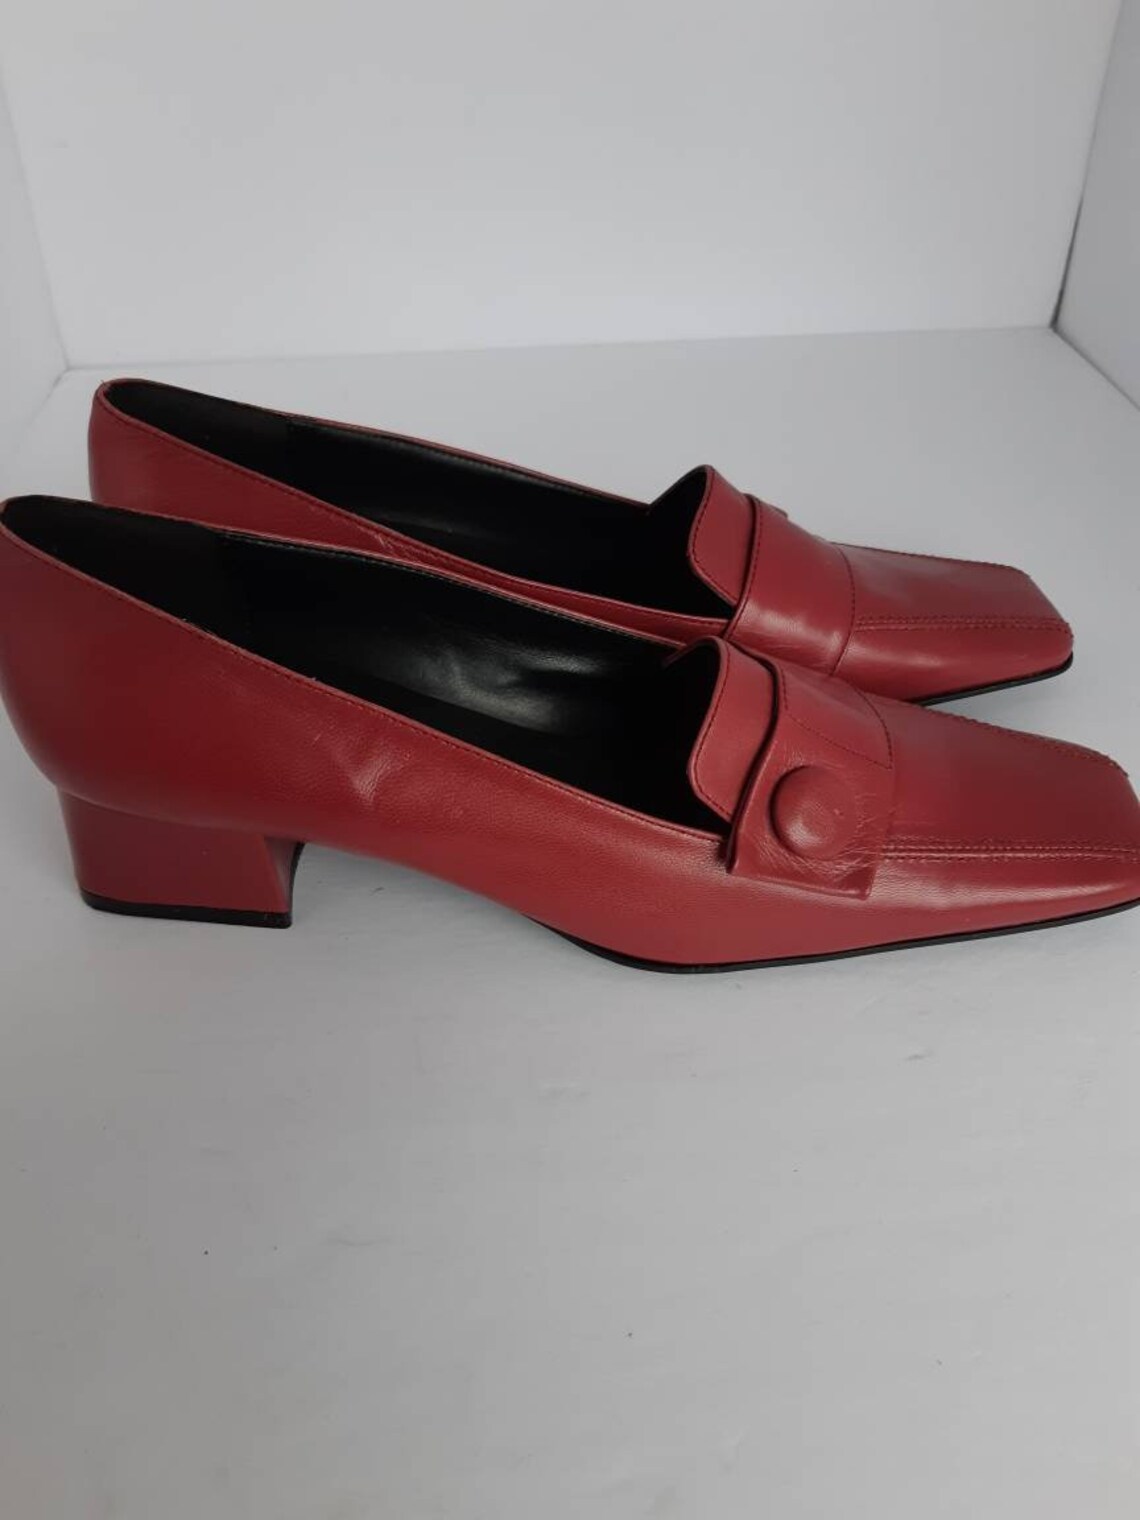 Vintage Leather Square Toe Cube Heel Shoes - Etsy Canada